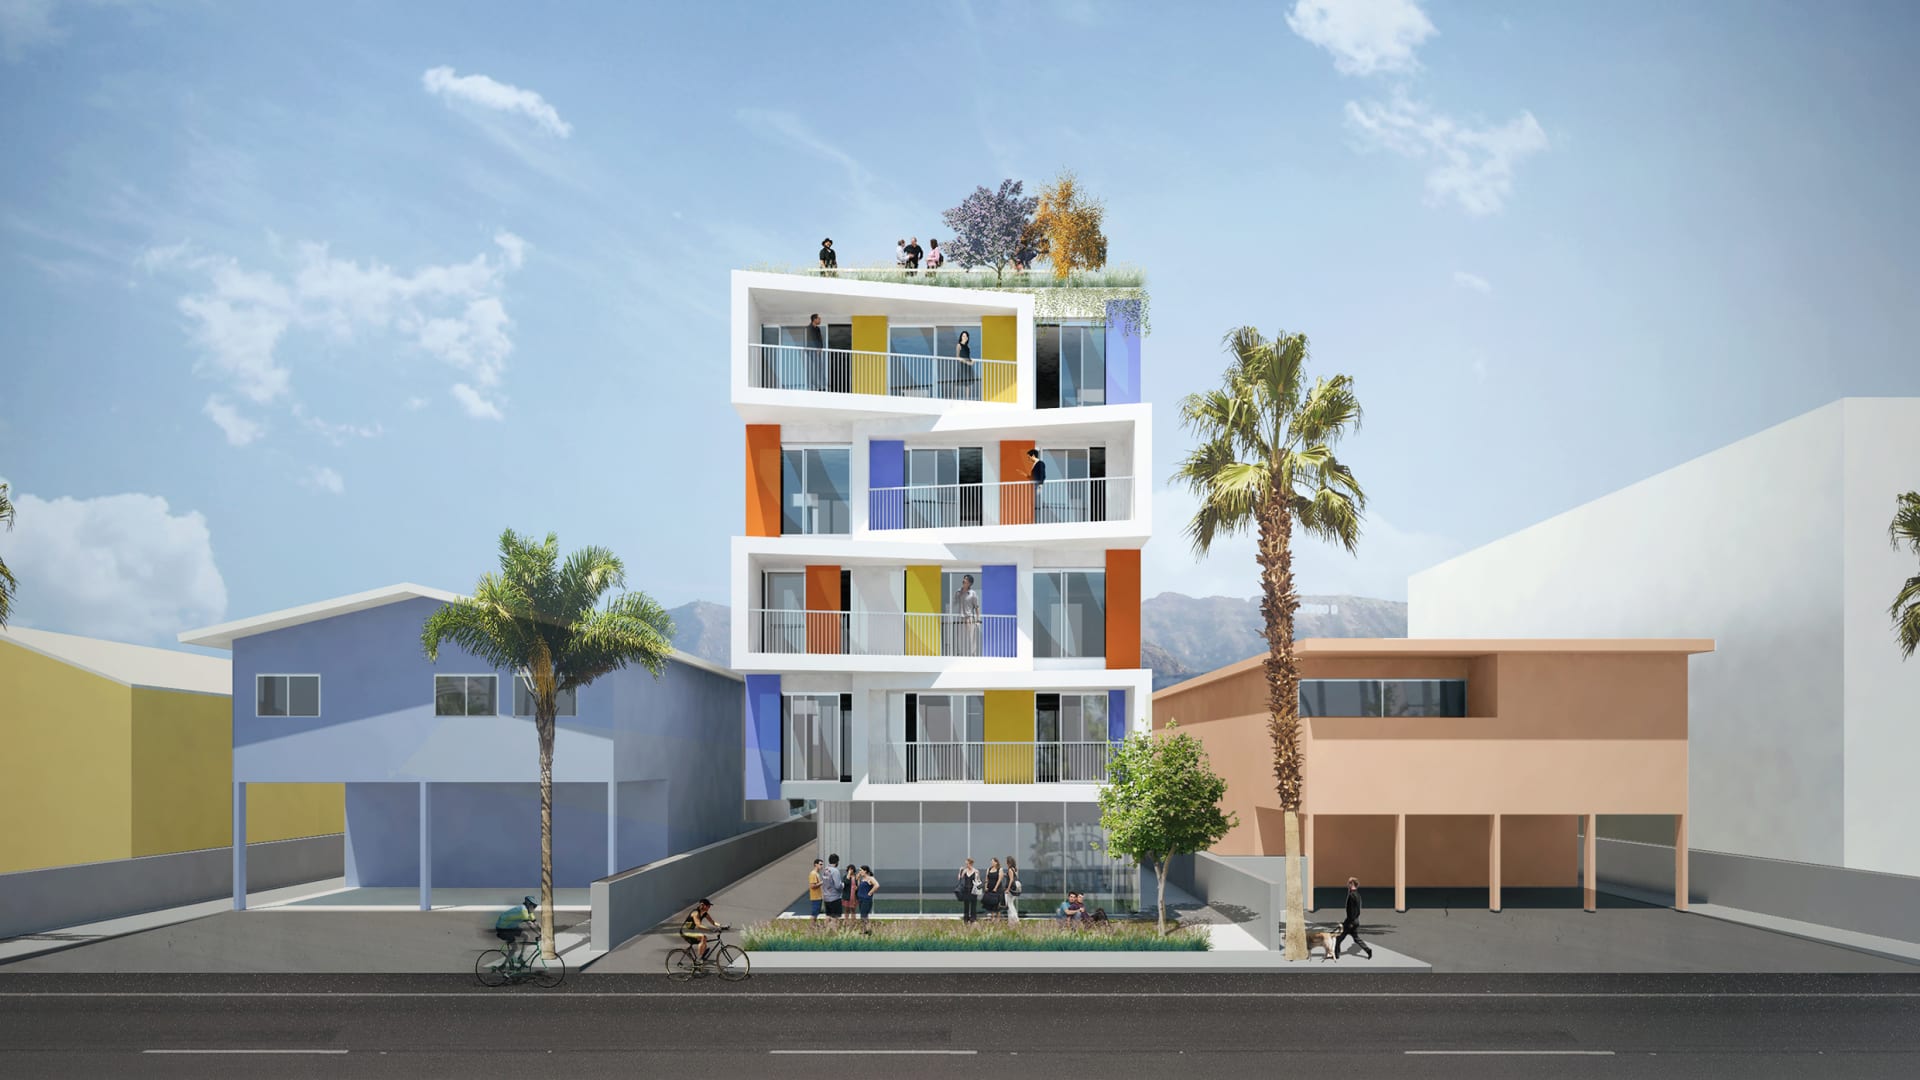 This kit of parts is designed to build cheaper, faster affordable housing on small urban lots